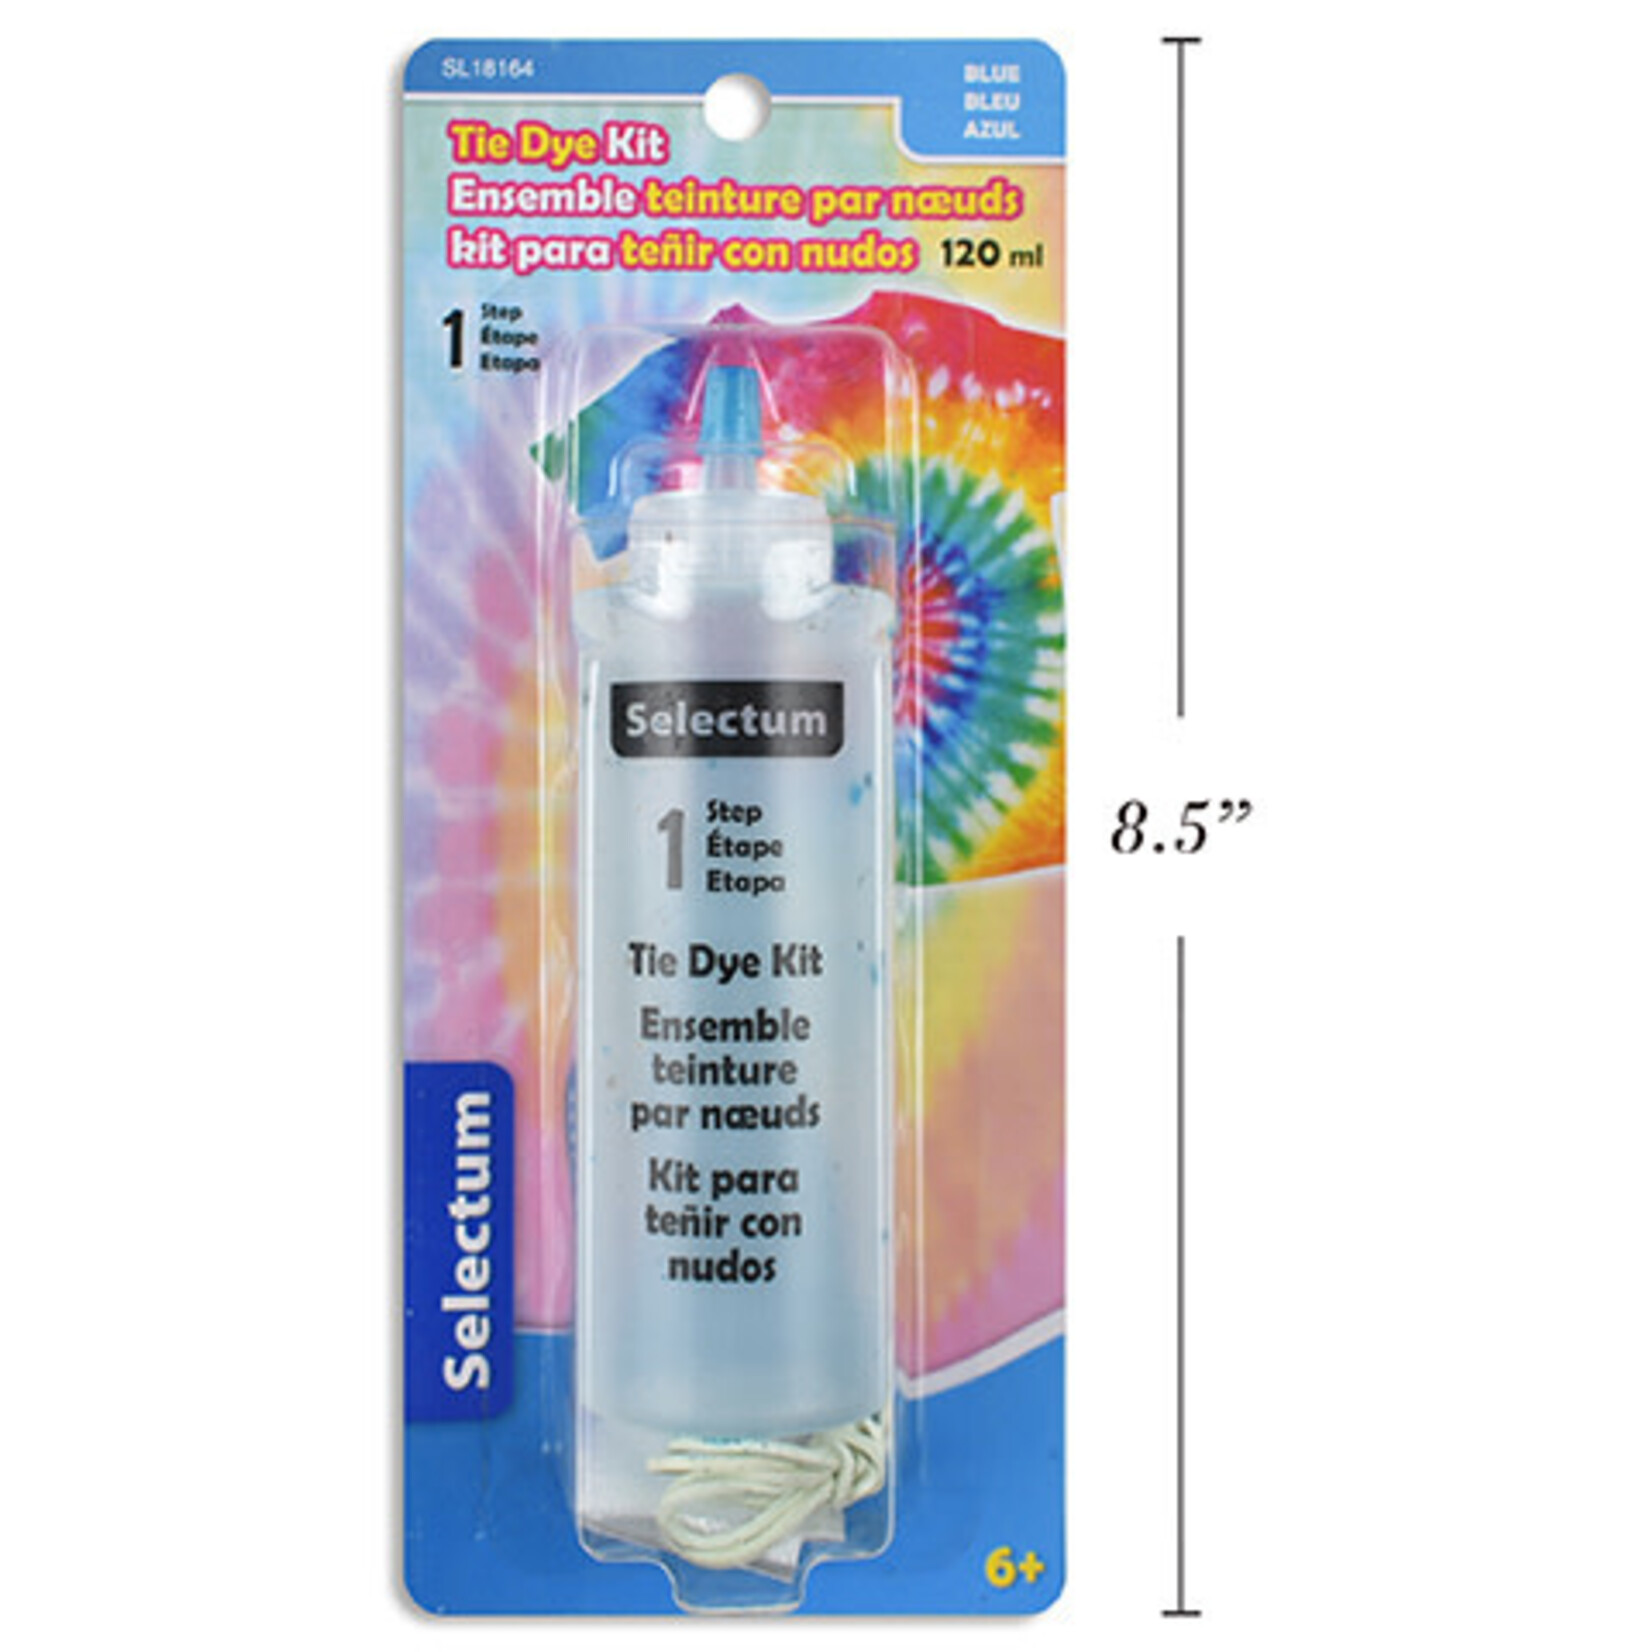 Tie Dye Bottle 120 ML with 6 Bands, 2 Gloves and Instructions